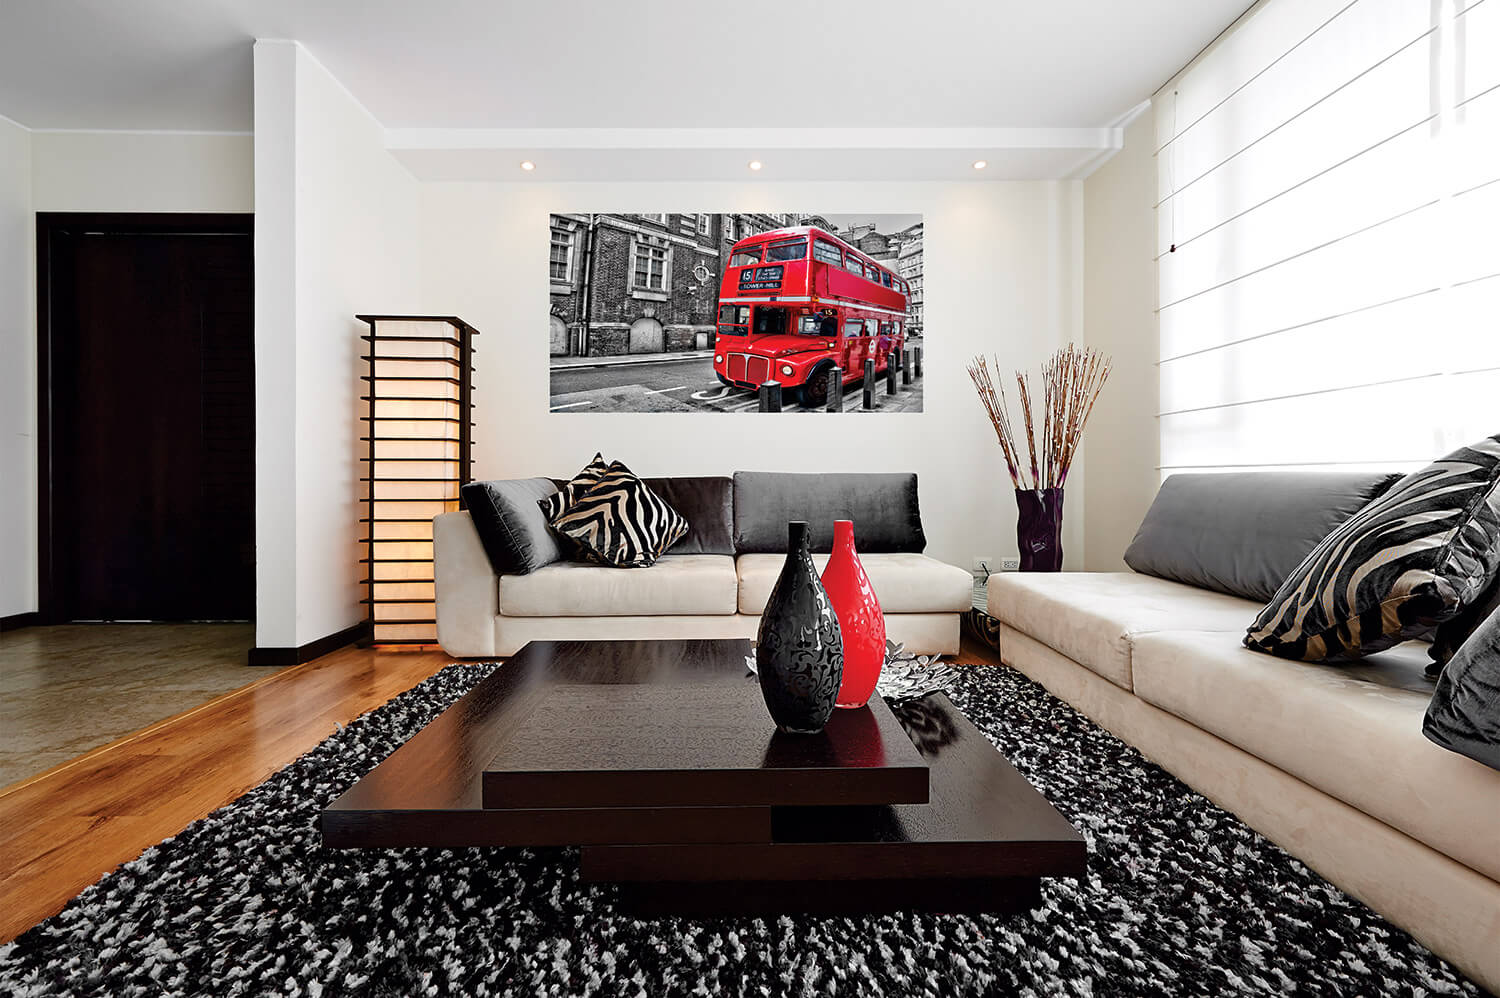 london bus - glass feature wall ideas